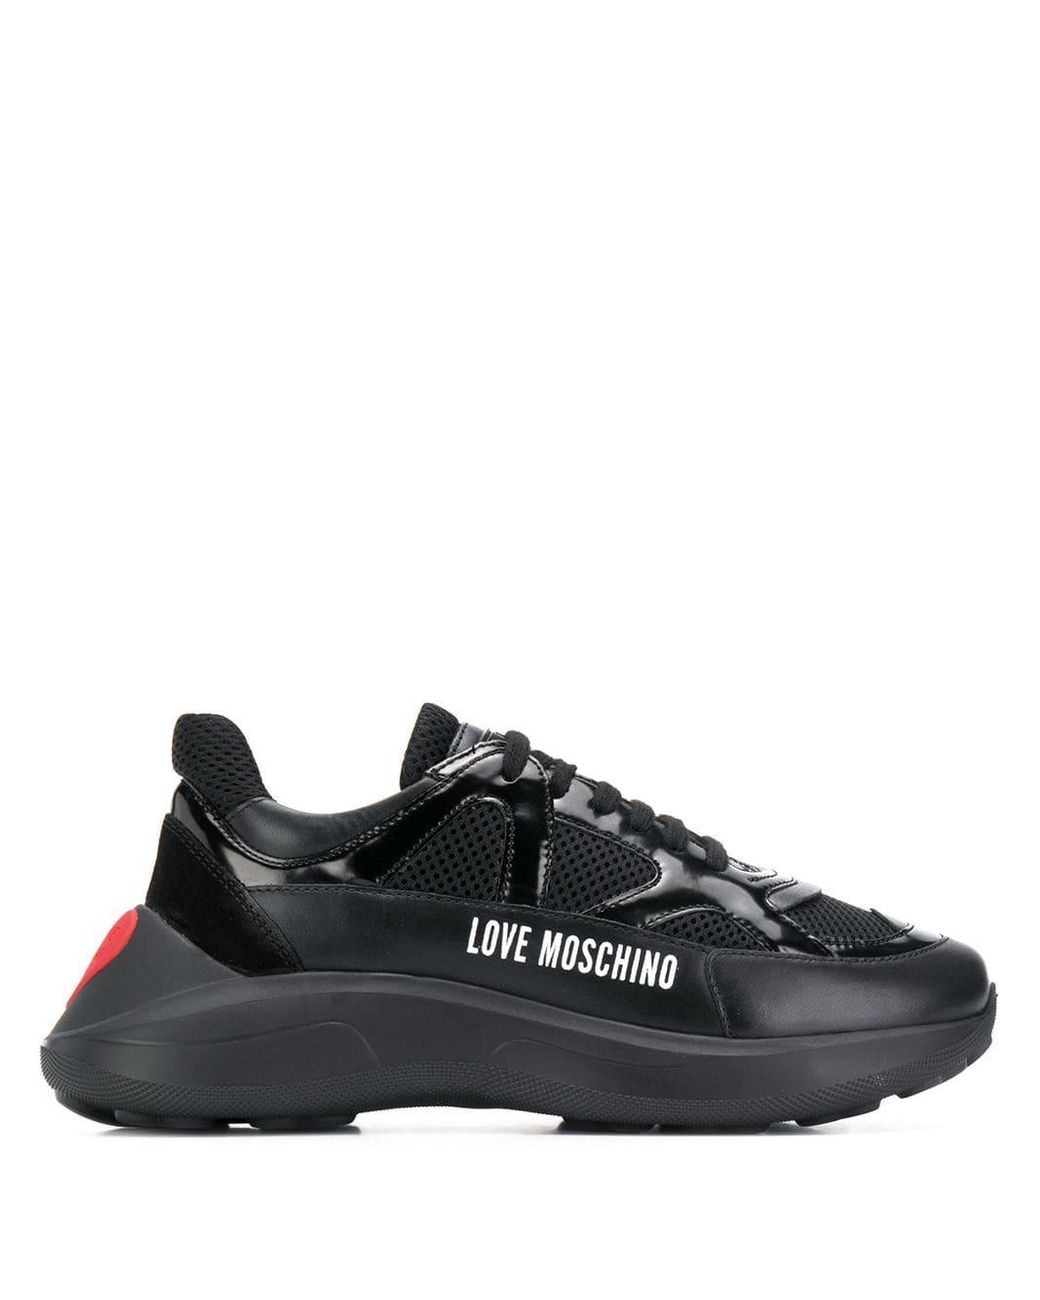 Love Moschino Heart Running Sneakers in Black | Lyst